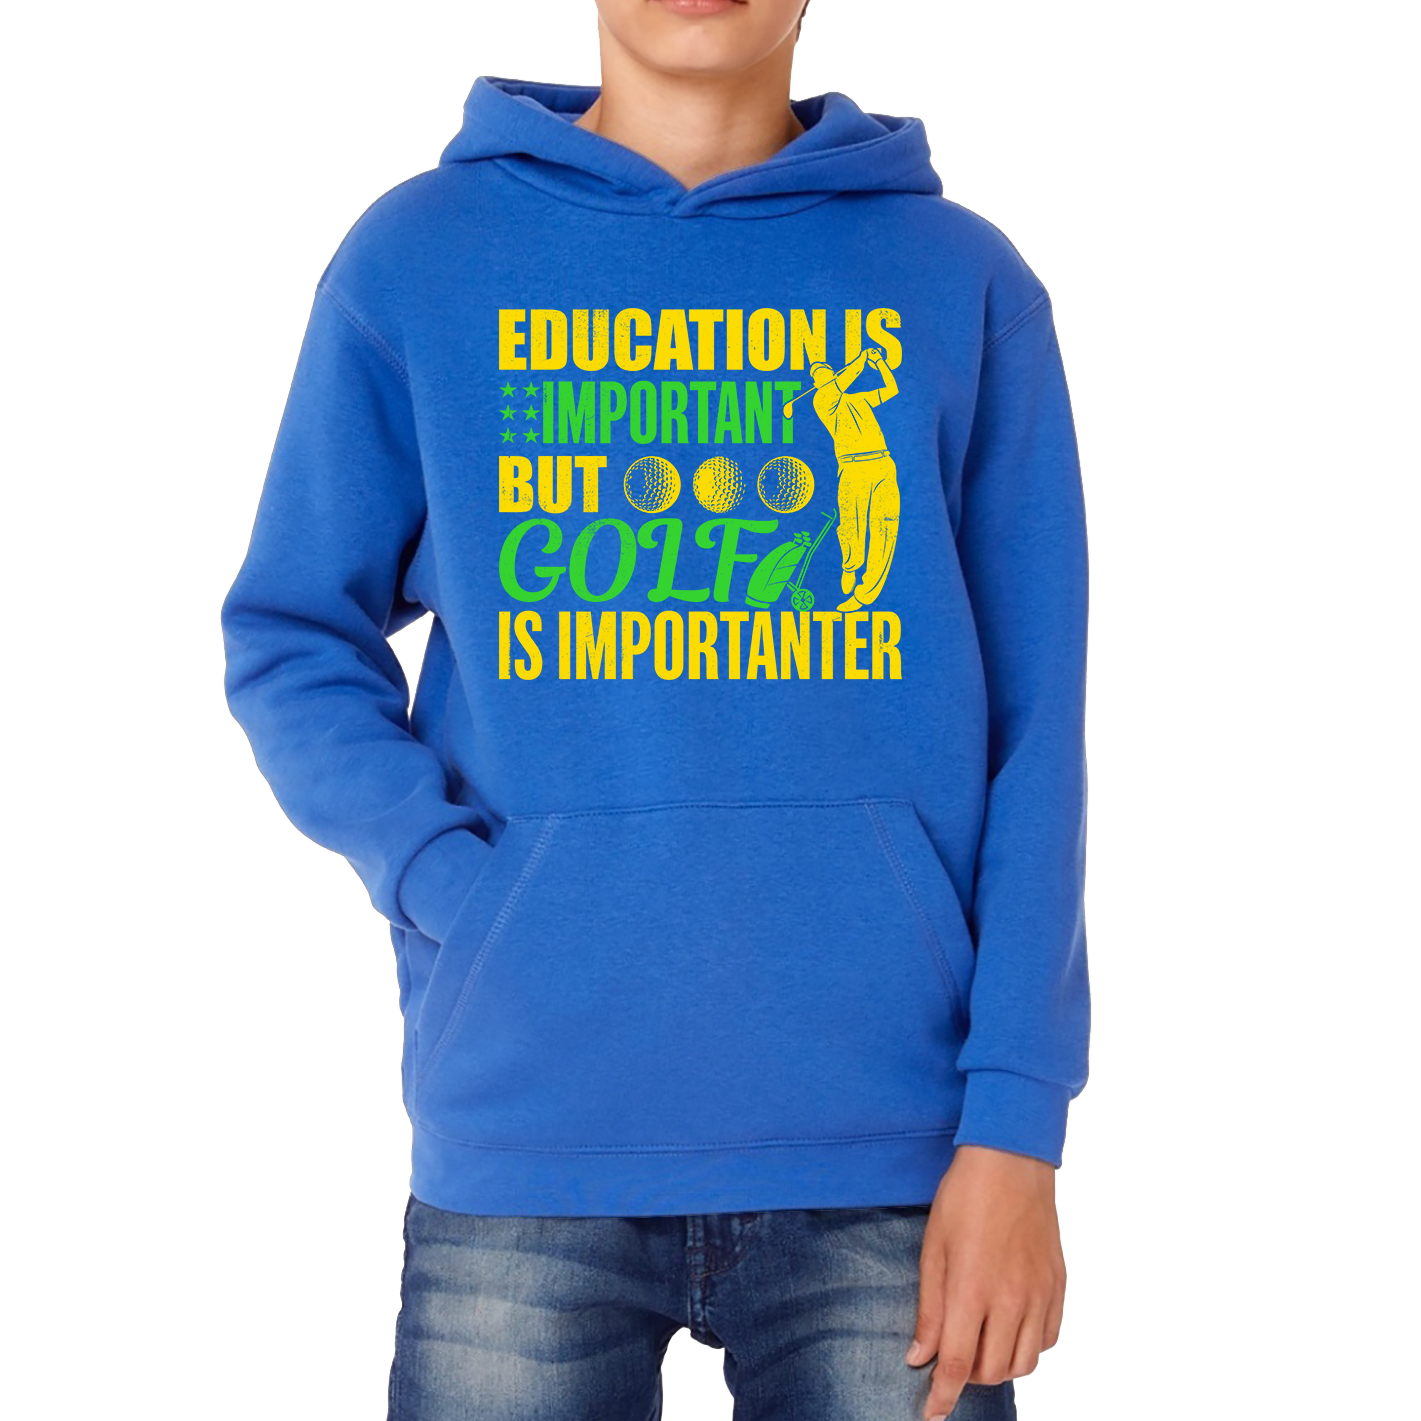 Education Is Important But Golf Is Importanter Hoodie Golf Lover Sports Lover Gift Kids Hoodie